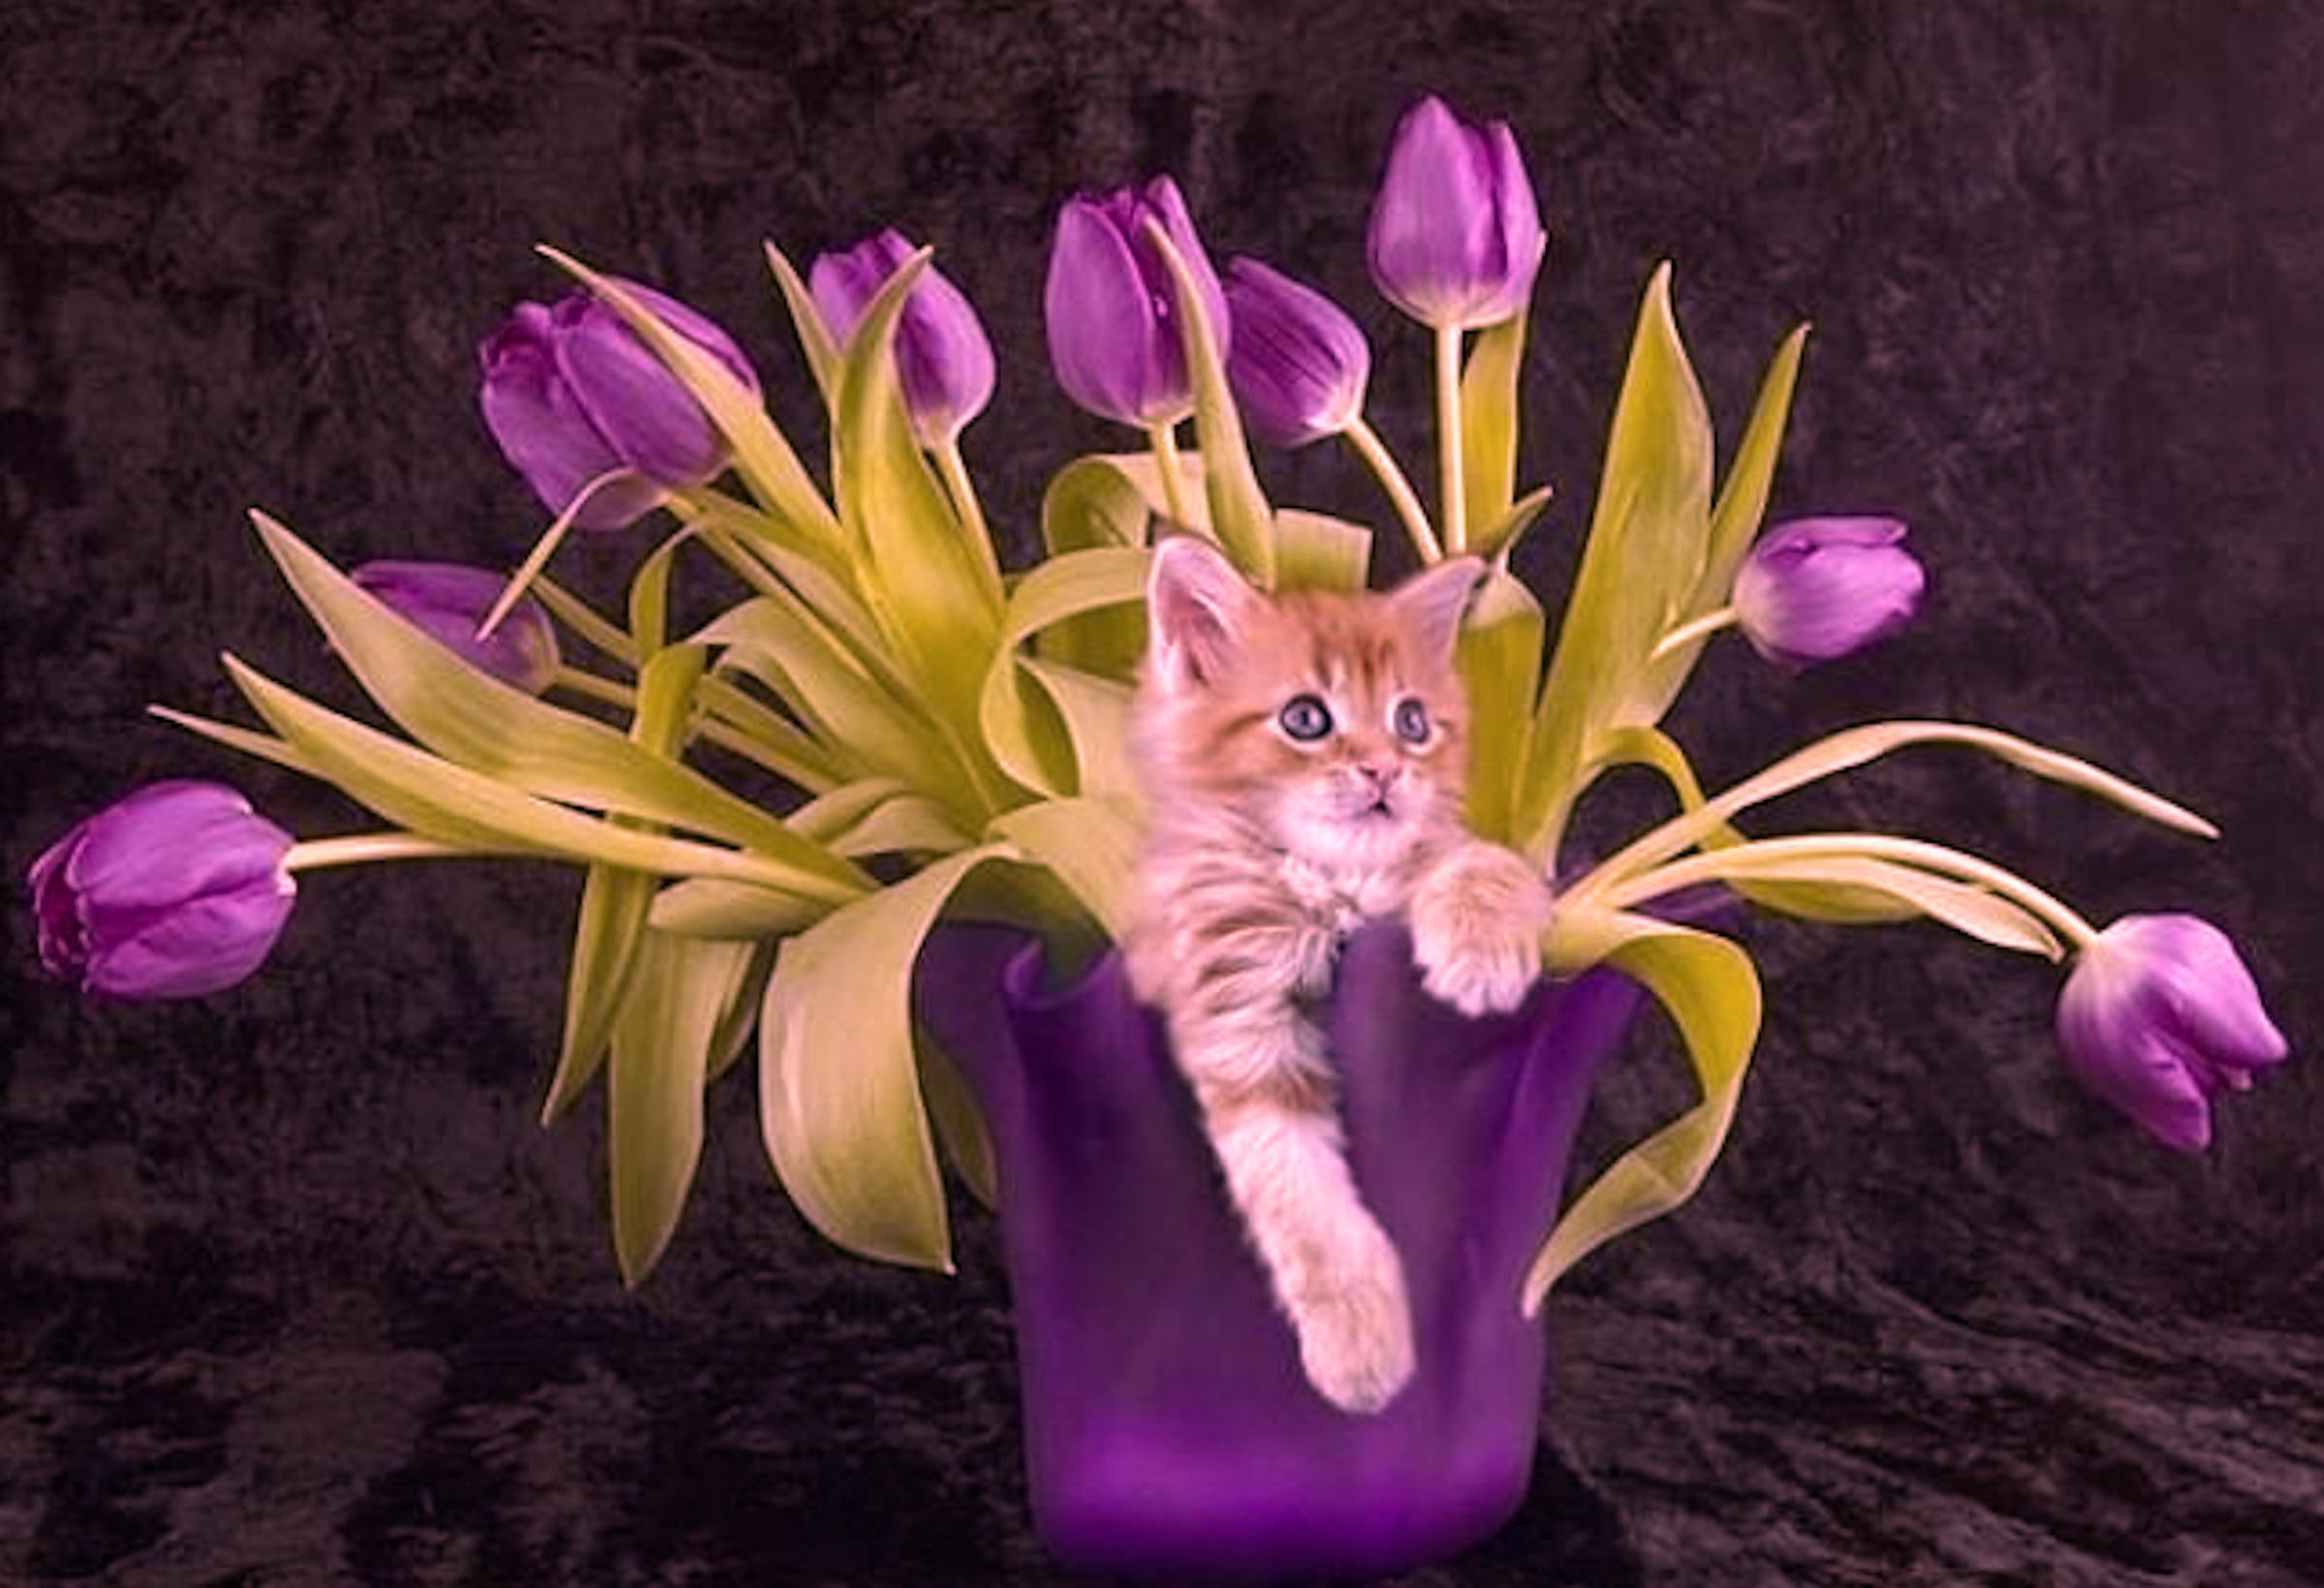 Cute Kitty Purple Tulips, pink and green tulips flower with brown and white cat